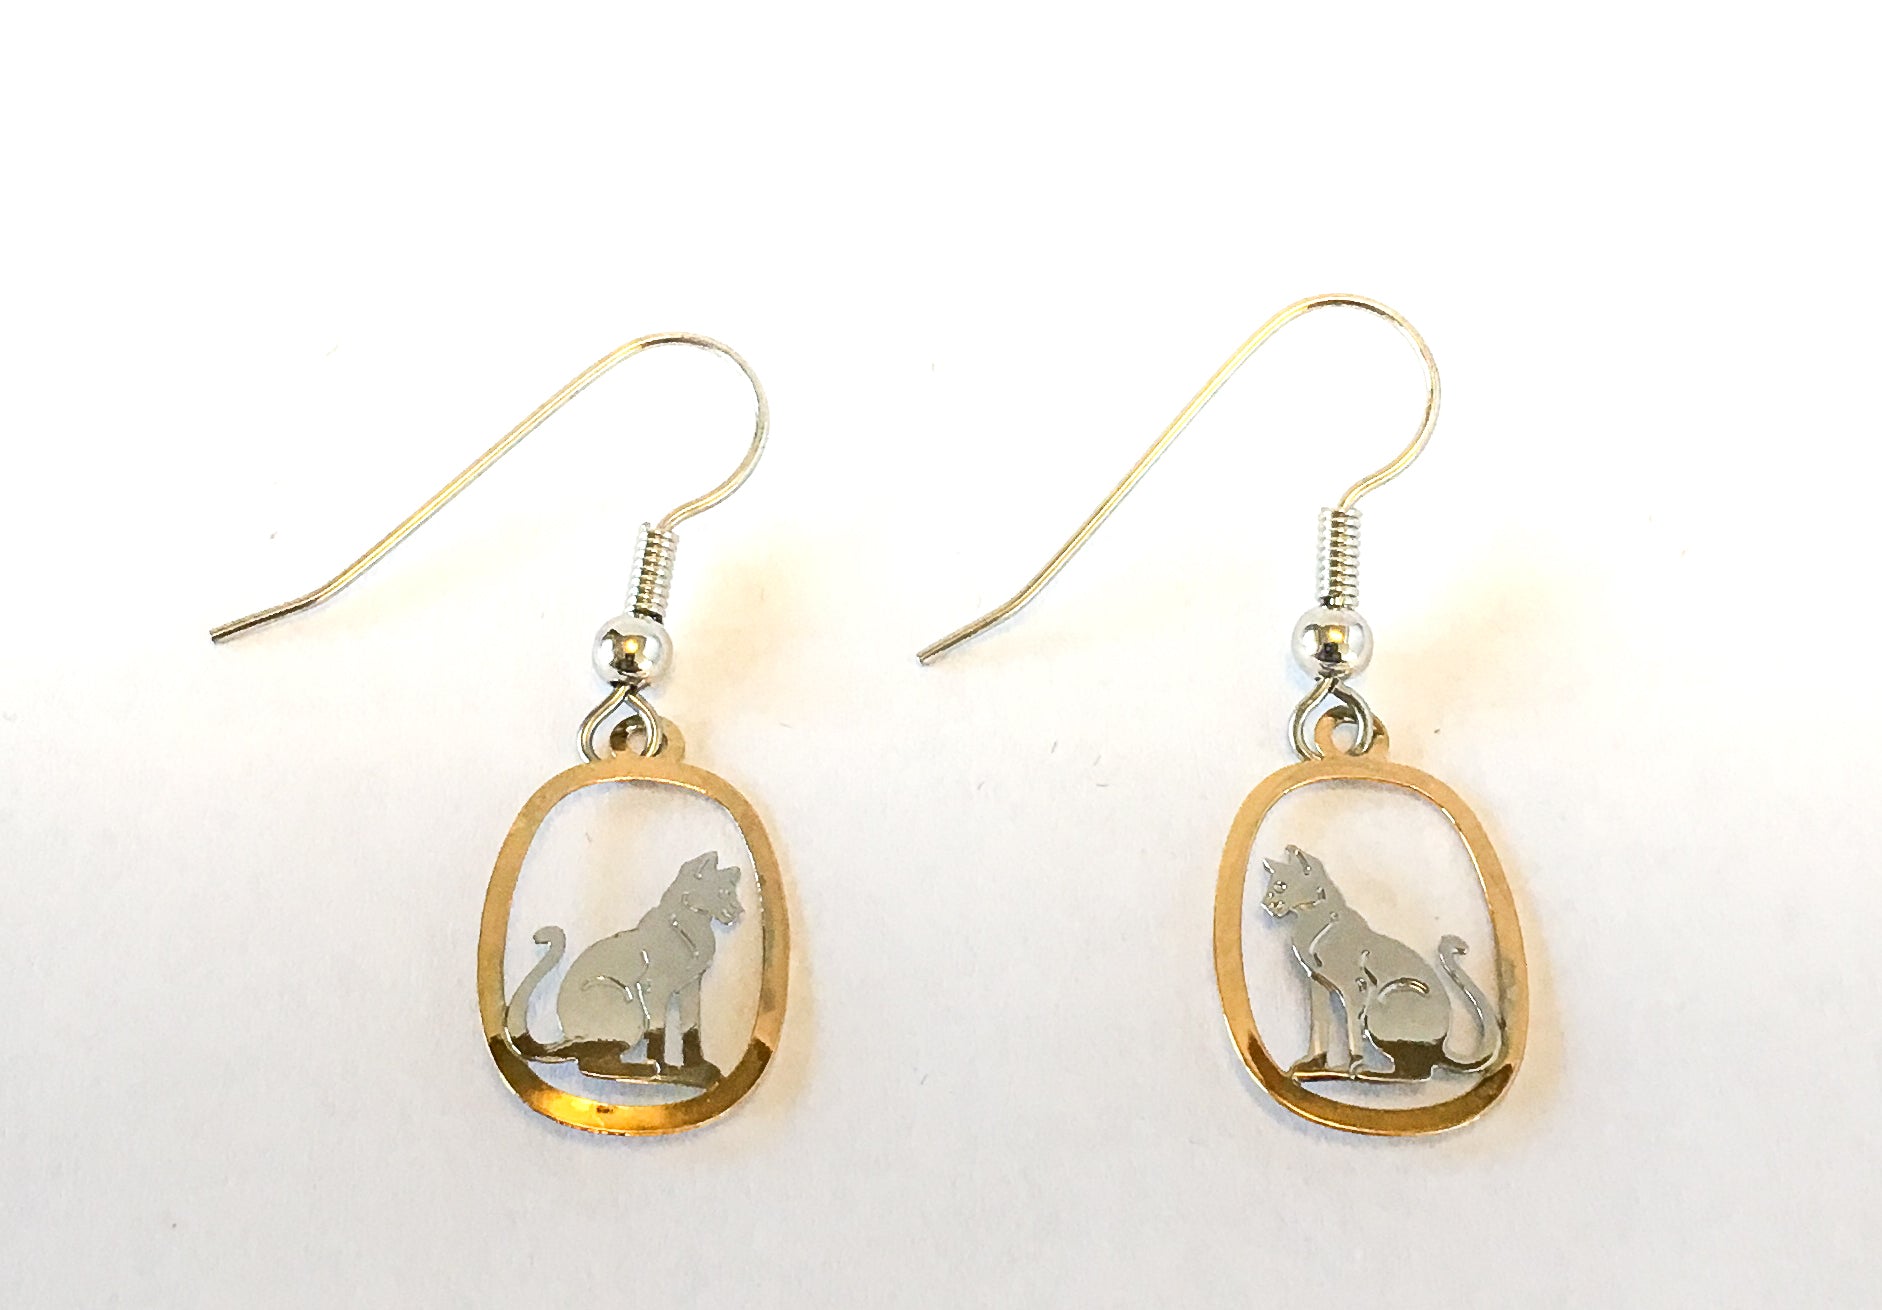 Silver and Gold cat earrings